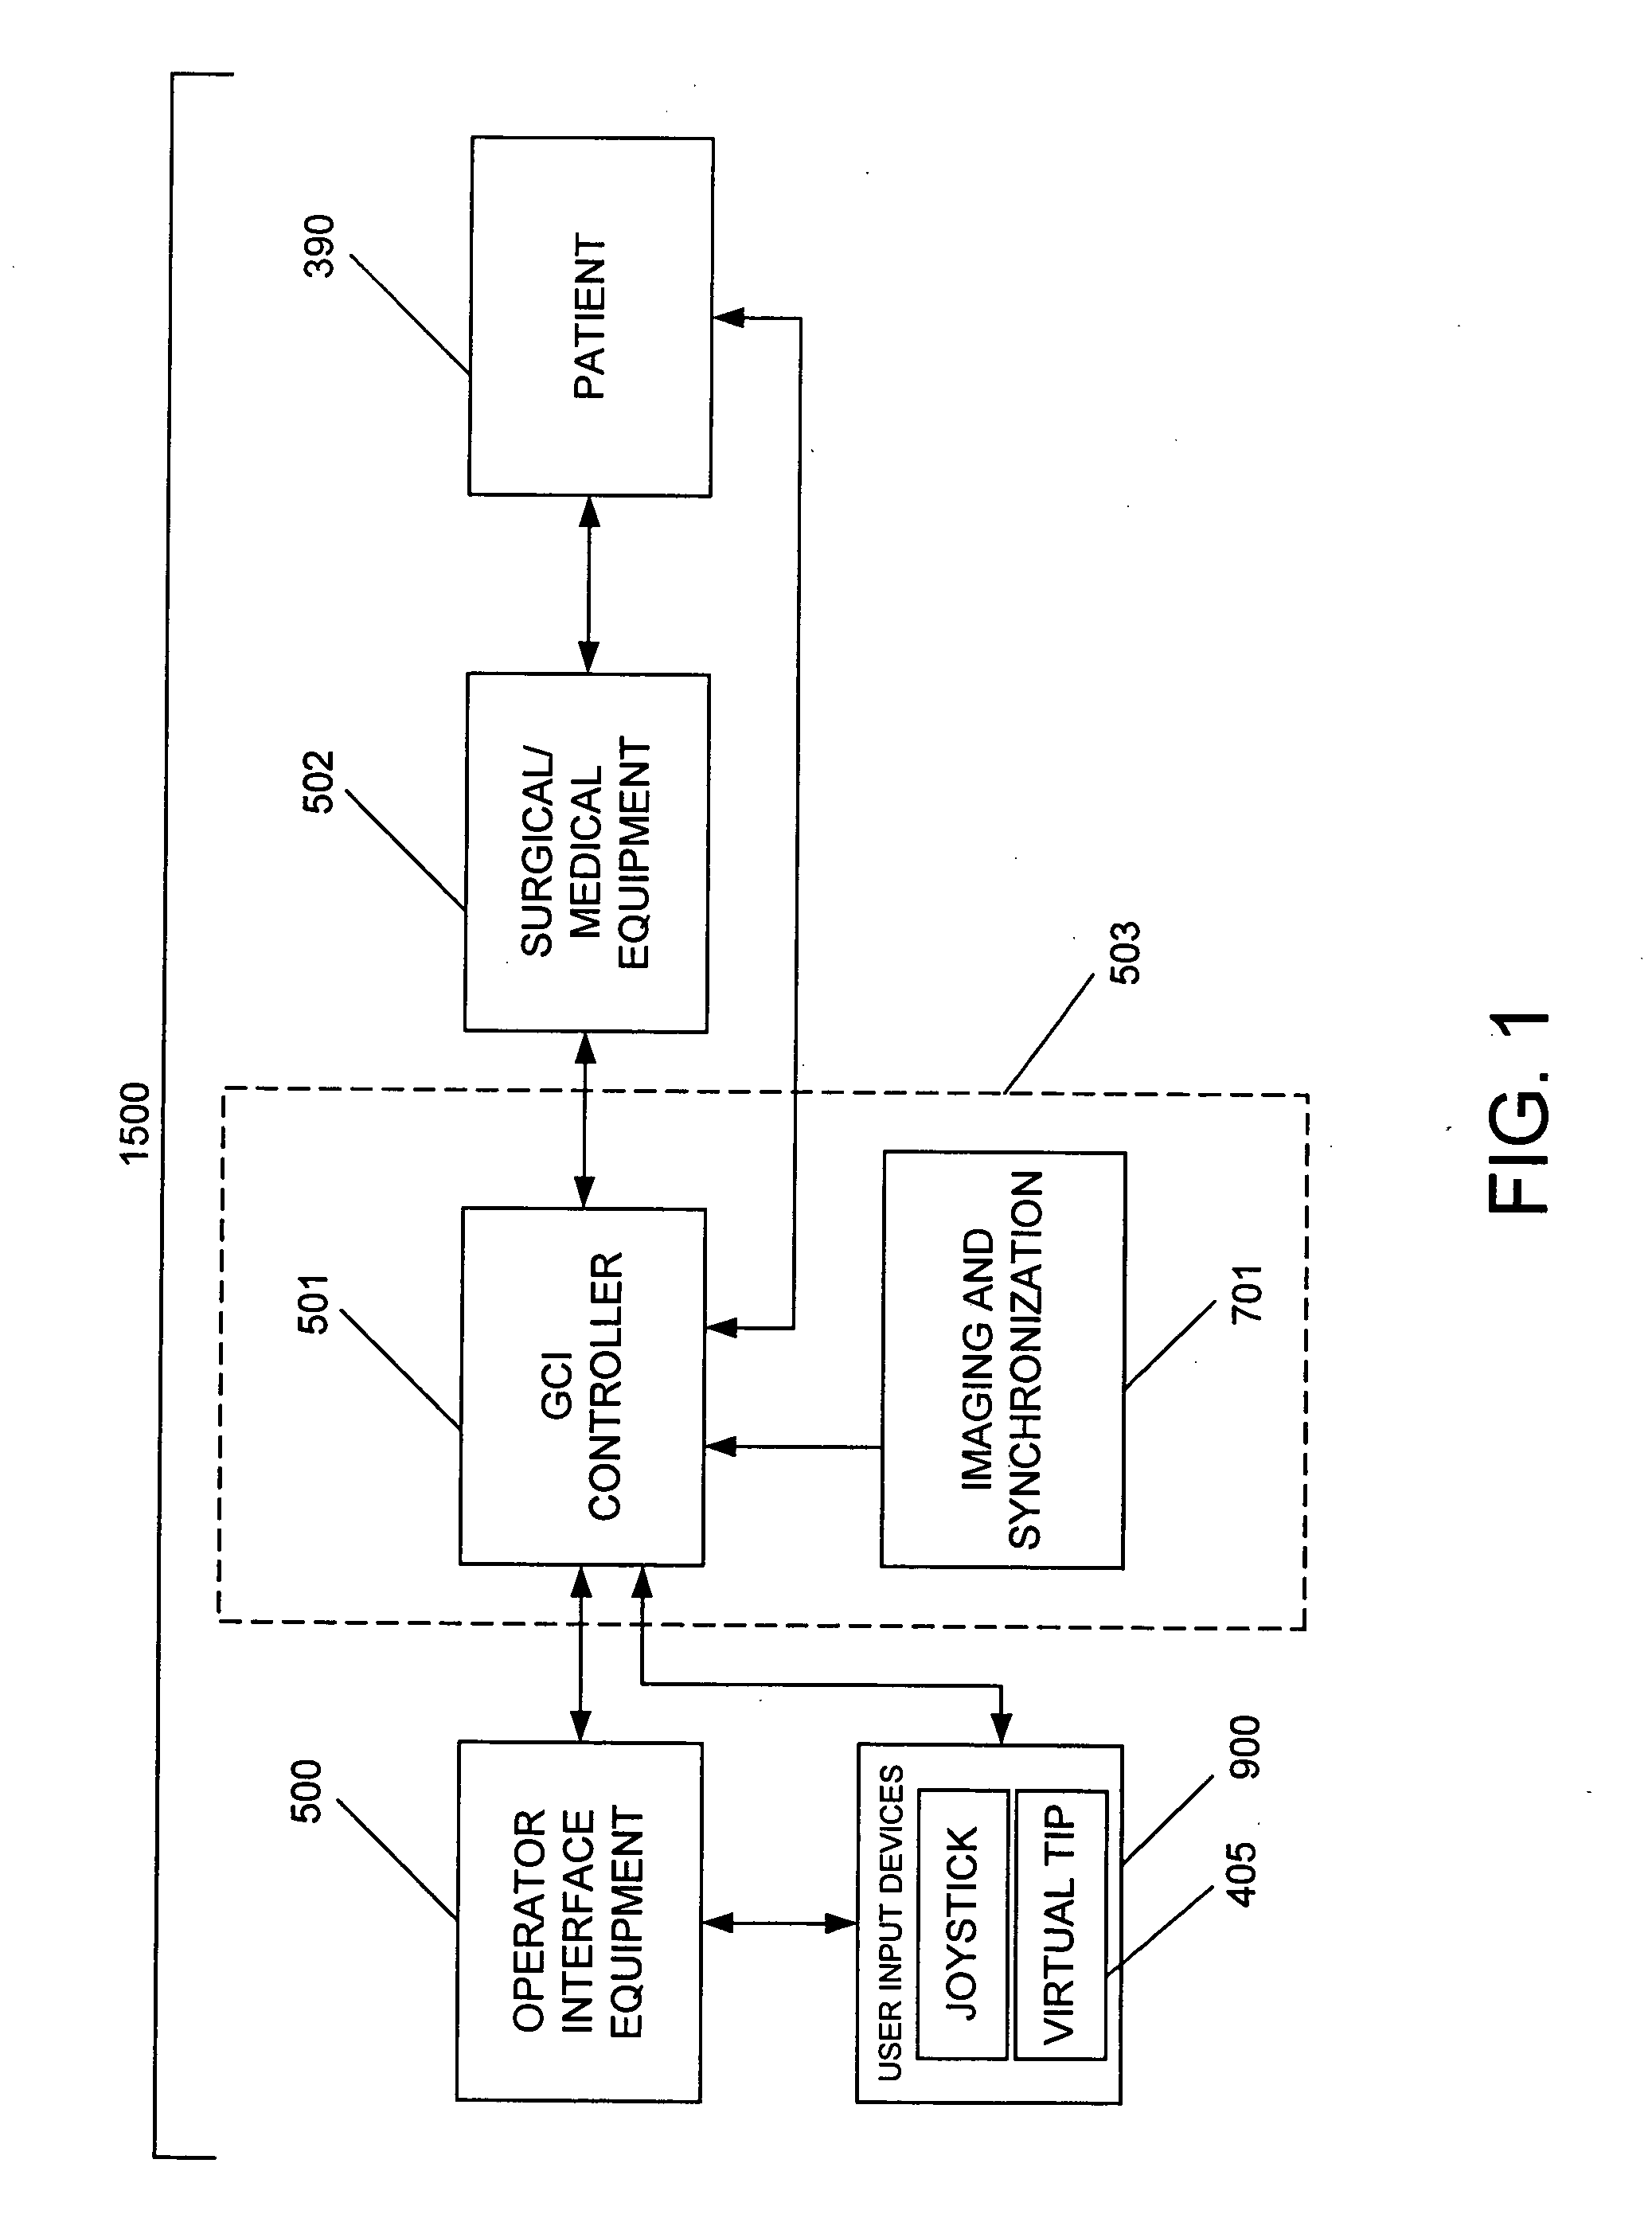 System and method for radar-assisted catheter guidance and control